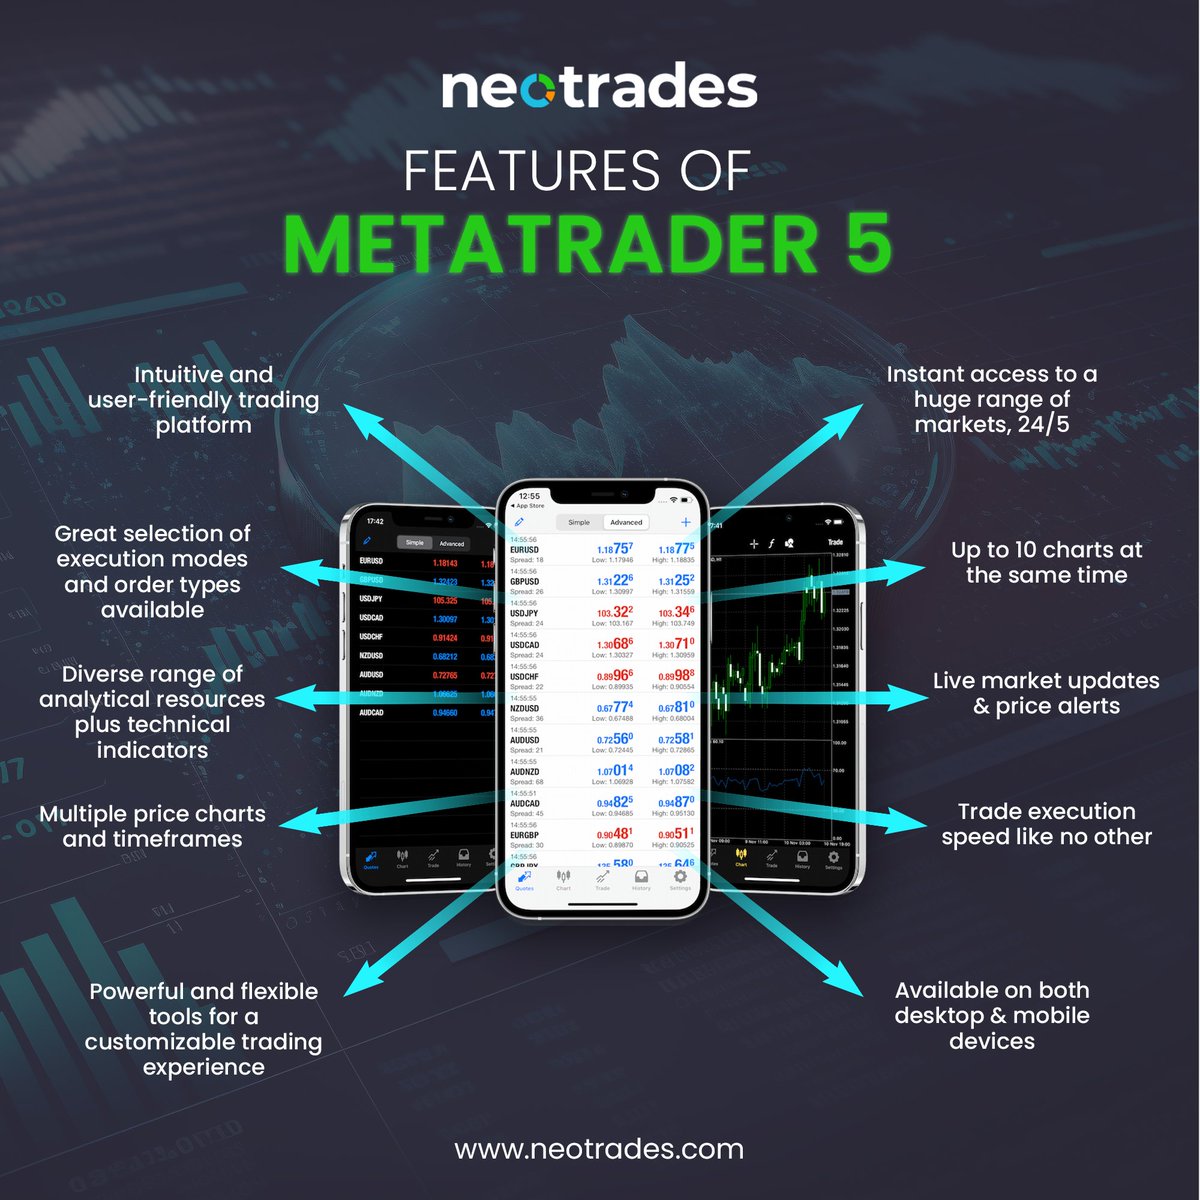 Elevate your trading to new heights with Metatrader5 and unlock a world of possibilities in the financial markets. Scroll though the carousel to learn more.

#buildwealth #investors #lifesayings #cryptocurrencyinvestments #tradecenter #forexcharts #bitcointrade #binancecoach